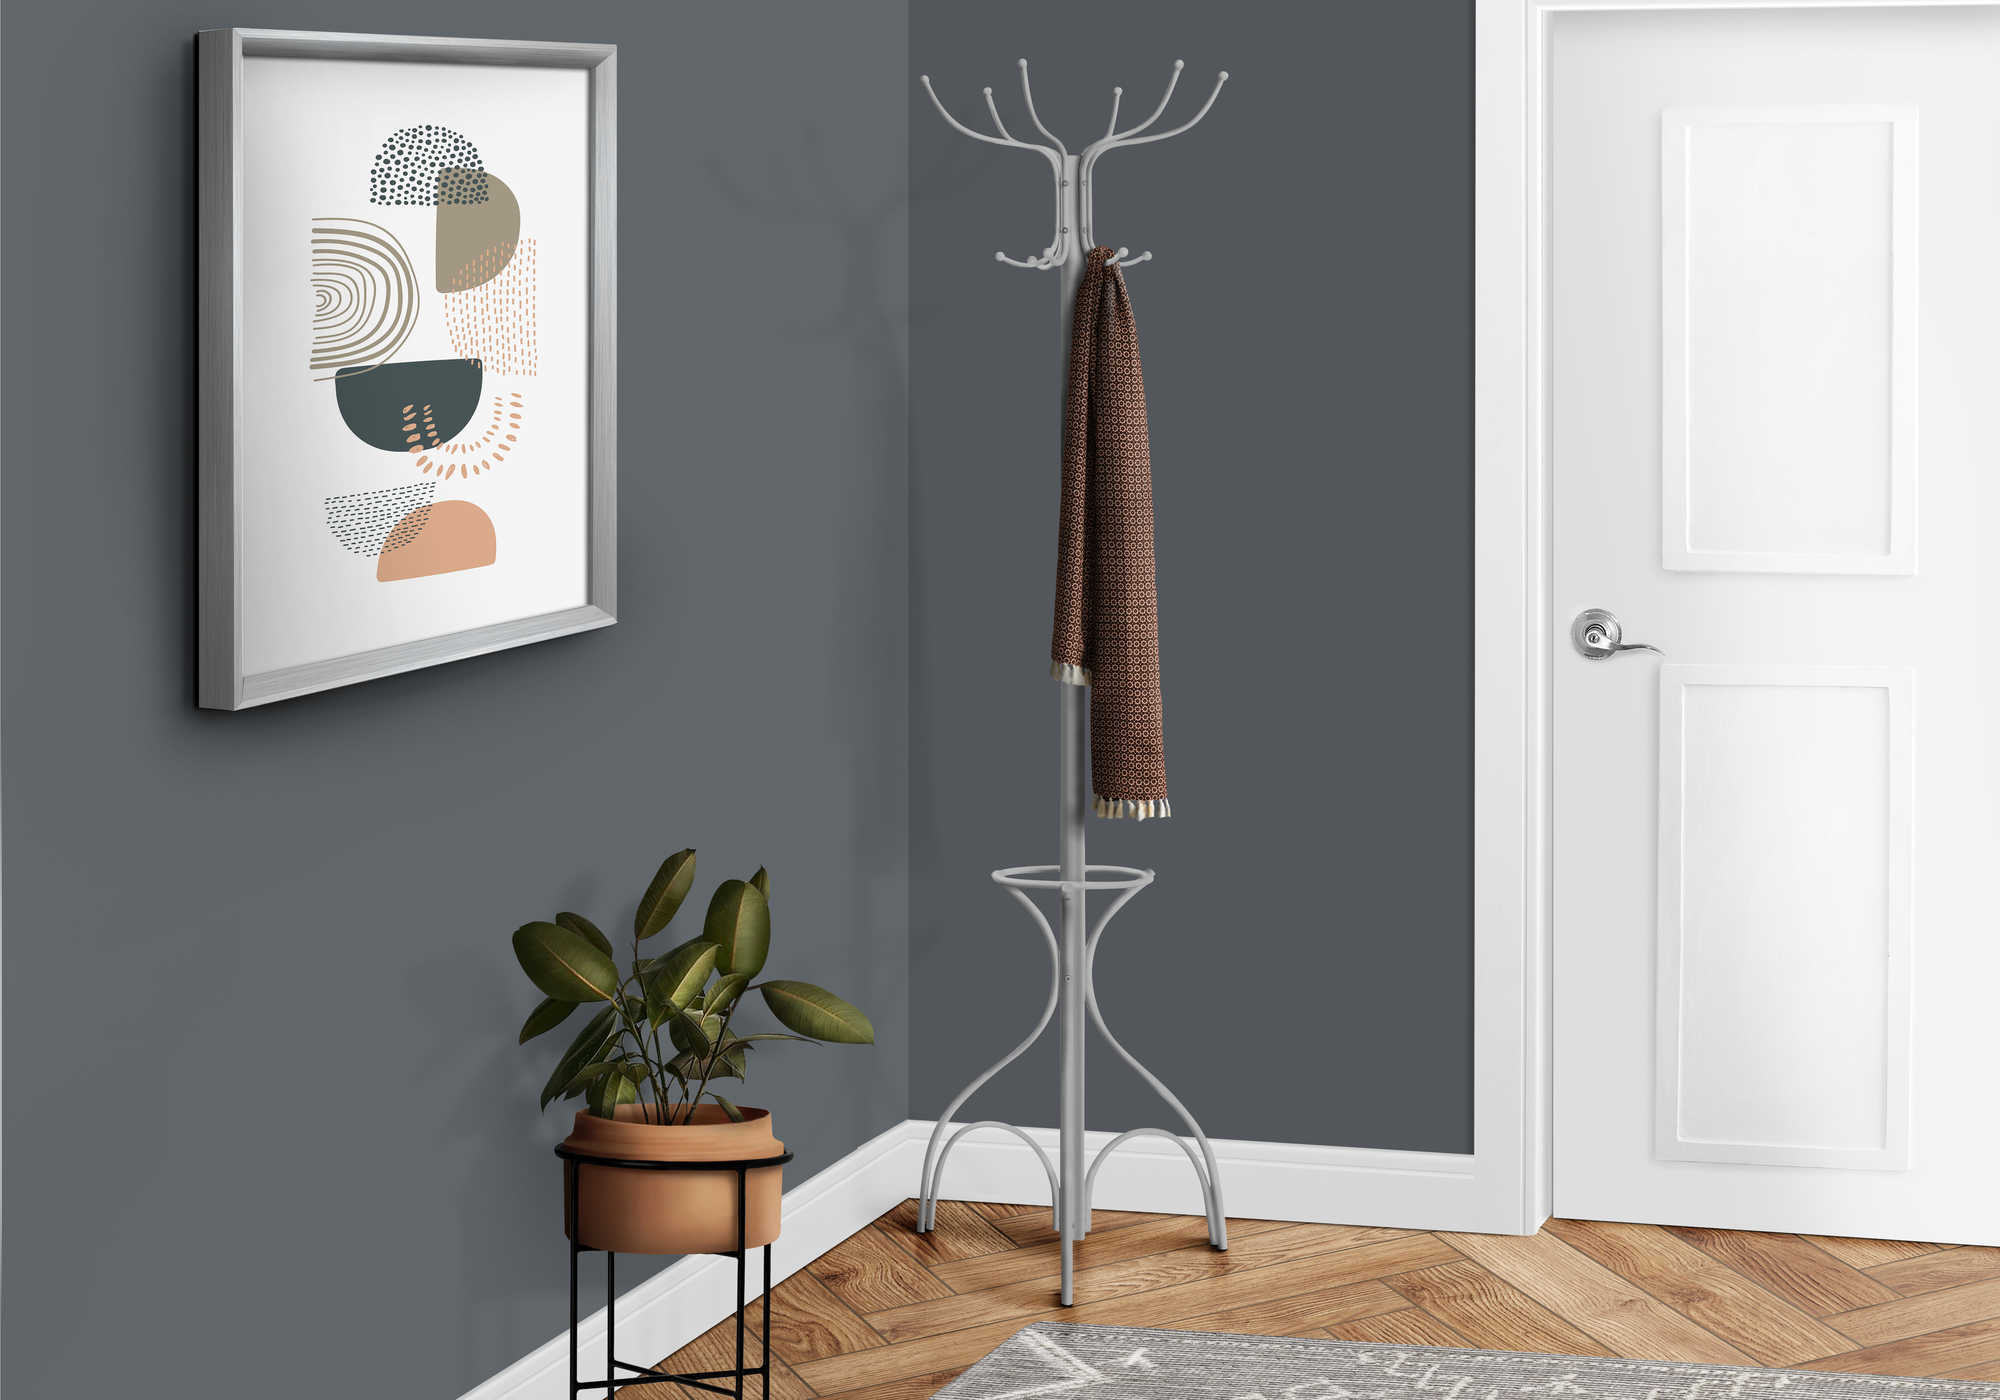 COAT RACK - 70"H / SILVER METAL WITH AN UMBRELLA HOLDER